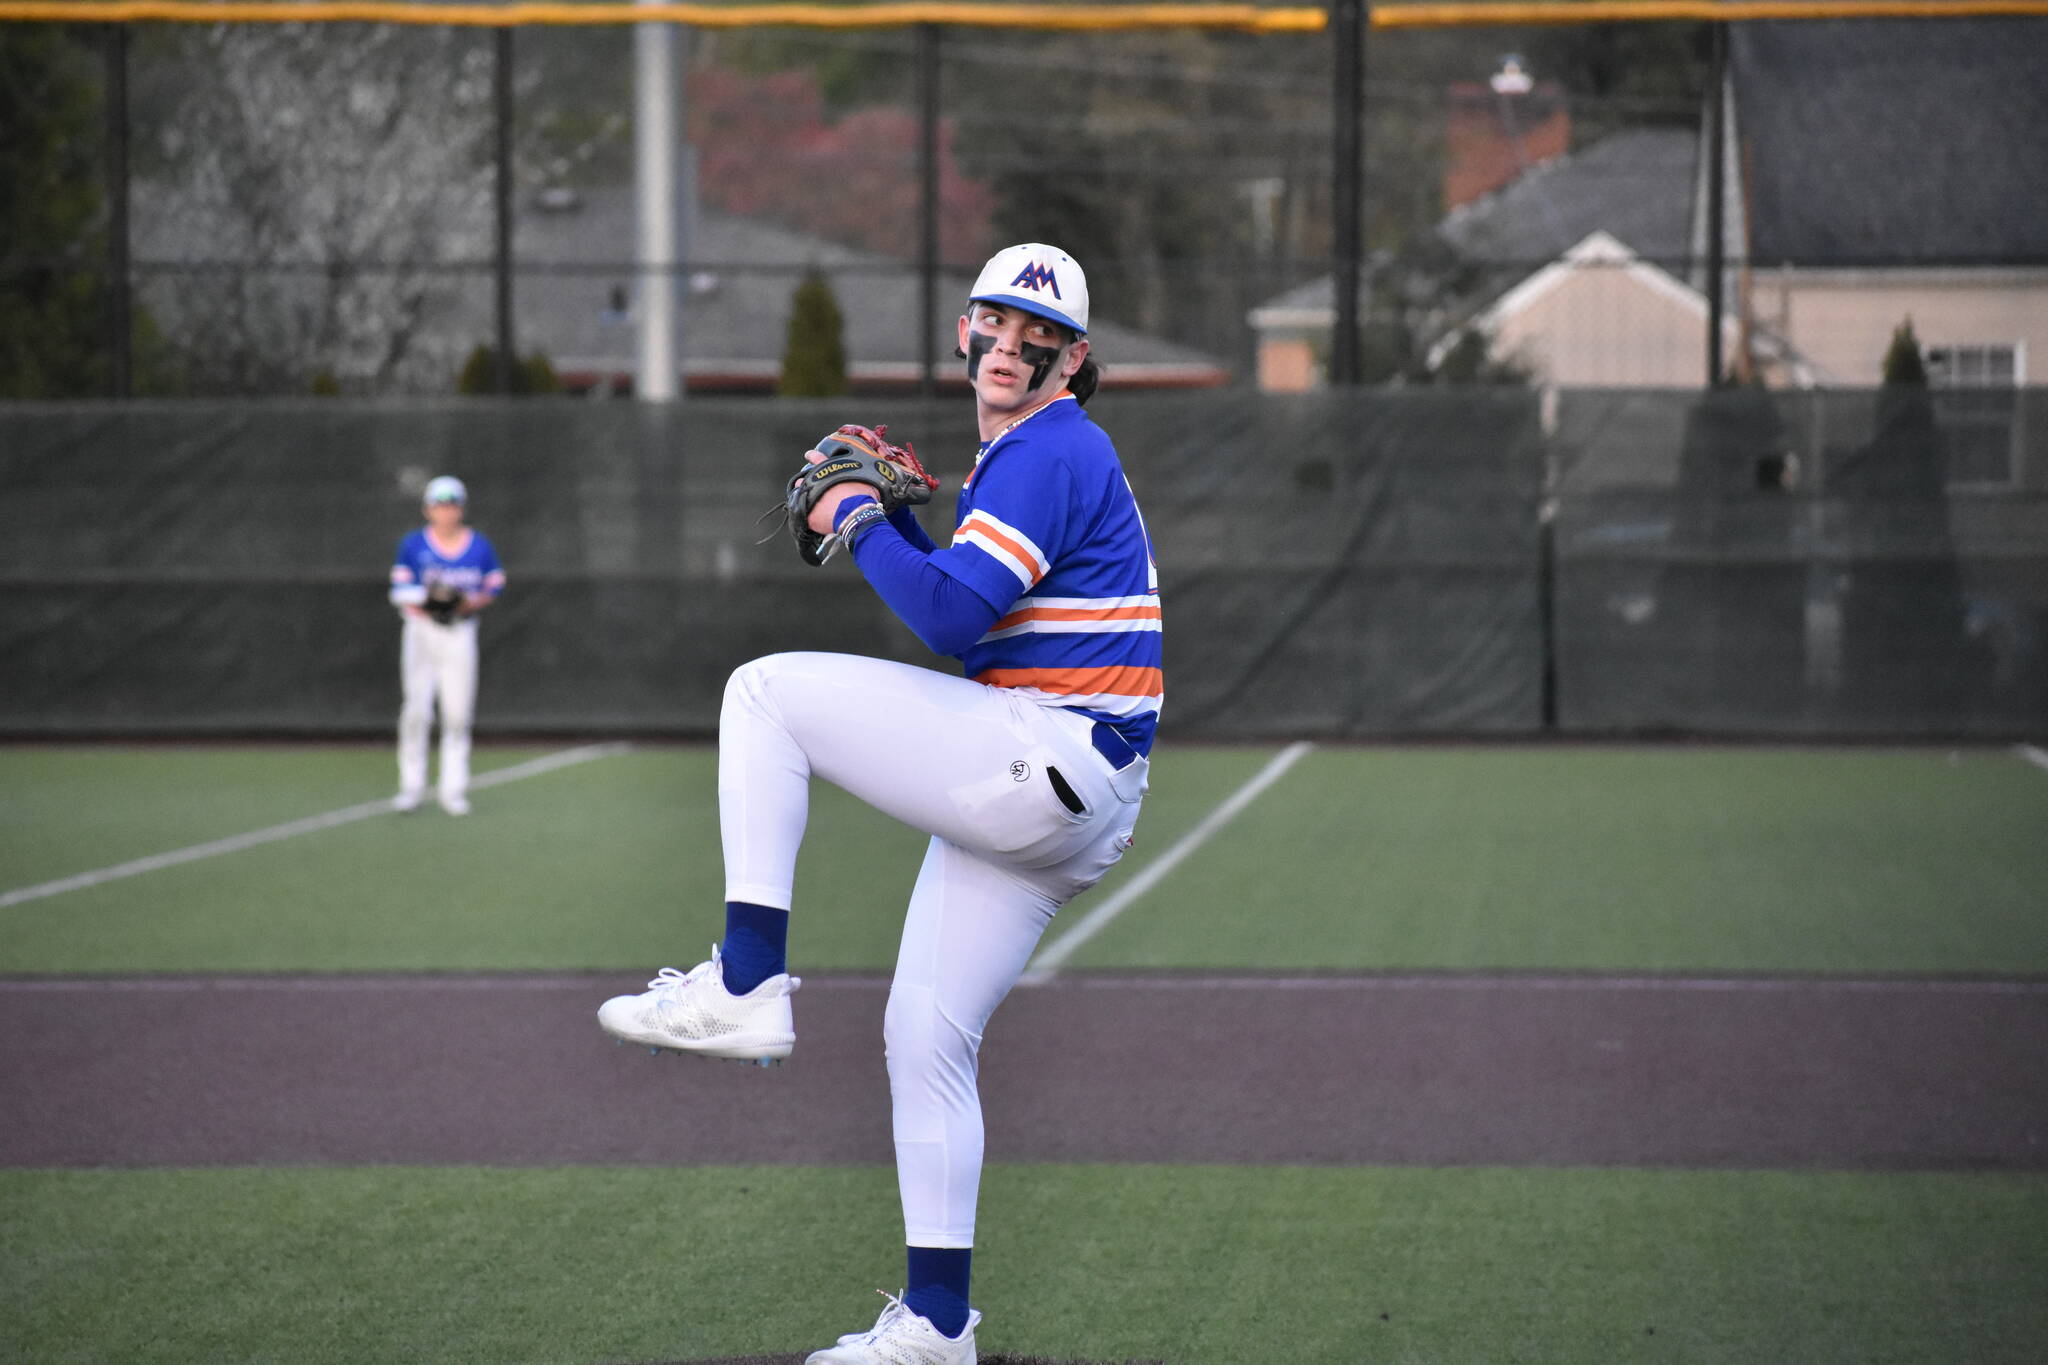 Photos by Ben Ray / The Reporter
Gino Trippy on the mound for the Lions against Auburn.